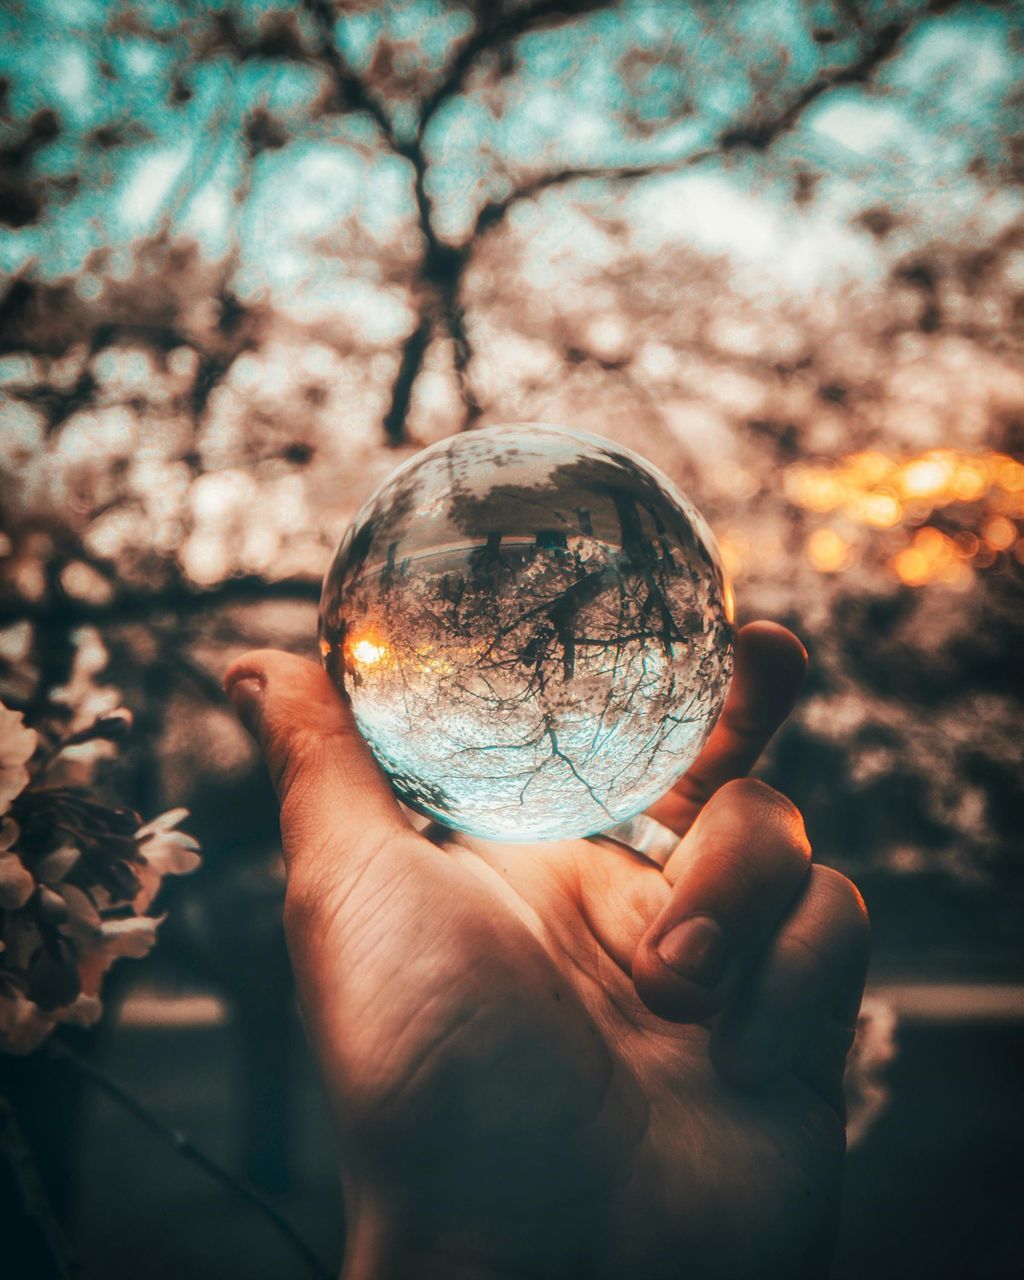 human hand, hand, human body part, holding, sphere, one person, focus on foreground, nature, close-up, real people, tree, unrecognizable person, personal perspective, plant, body part, transparent, finger, human finger, outdoors